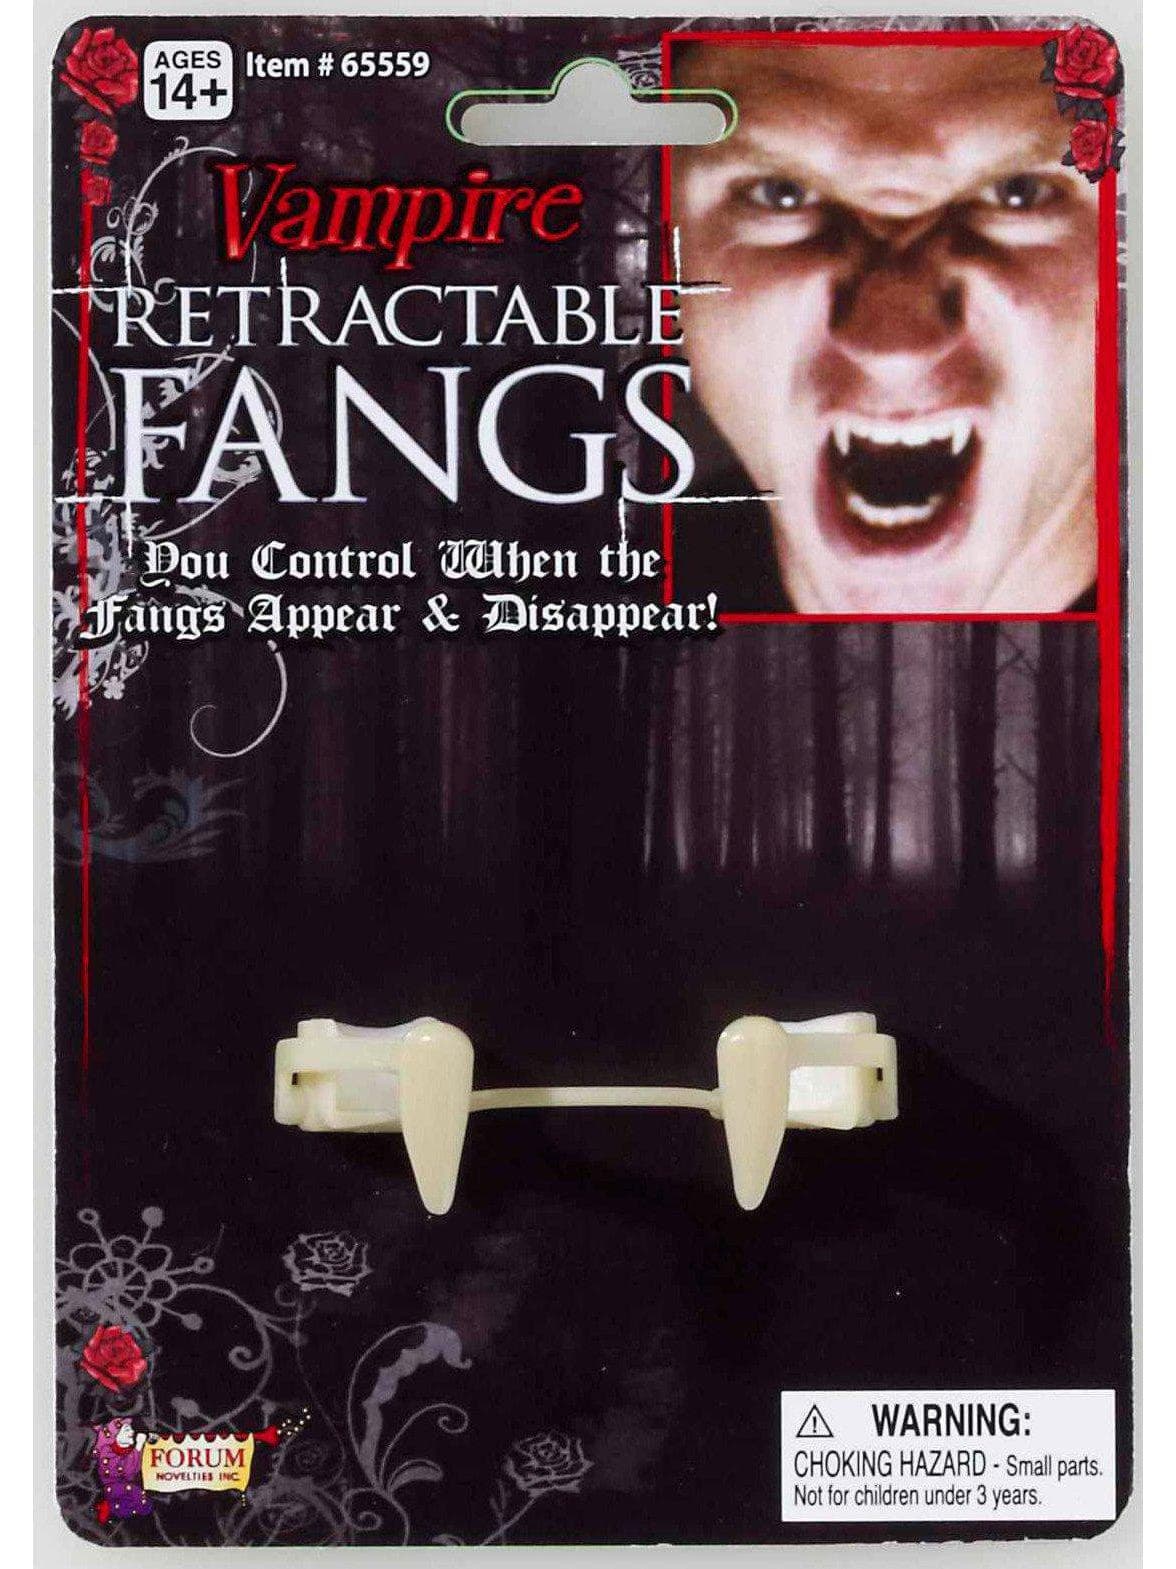 Custom Movie Quality Fangs, Teeth Caps + all Dental Fx, for Vampire Lovers,  Cosplay & Gothic Body Wear - Free Delivery Worldwide.